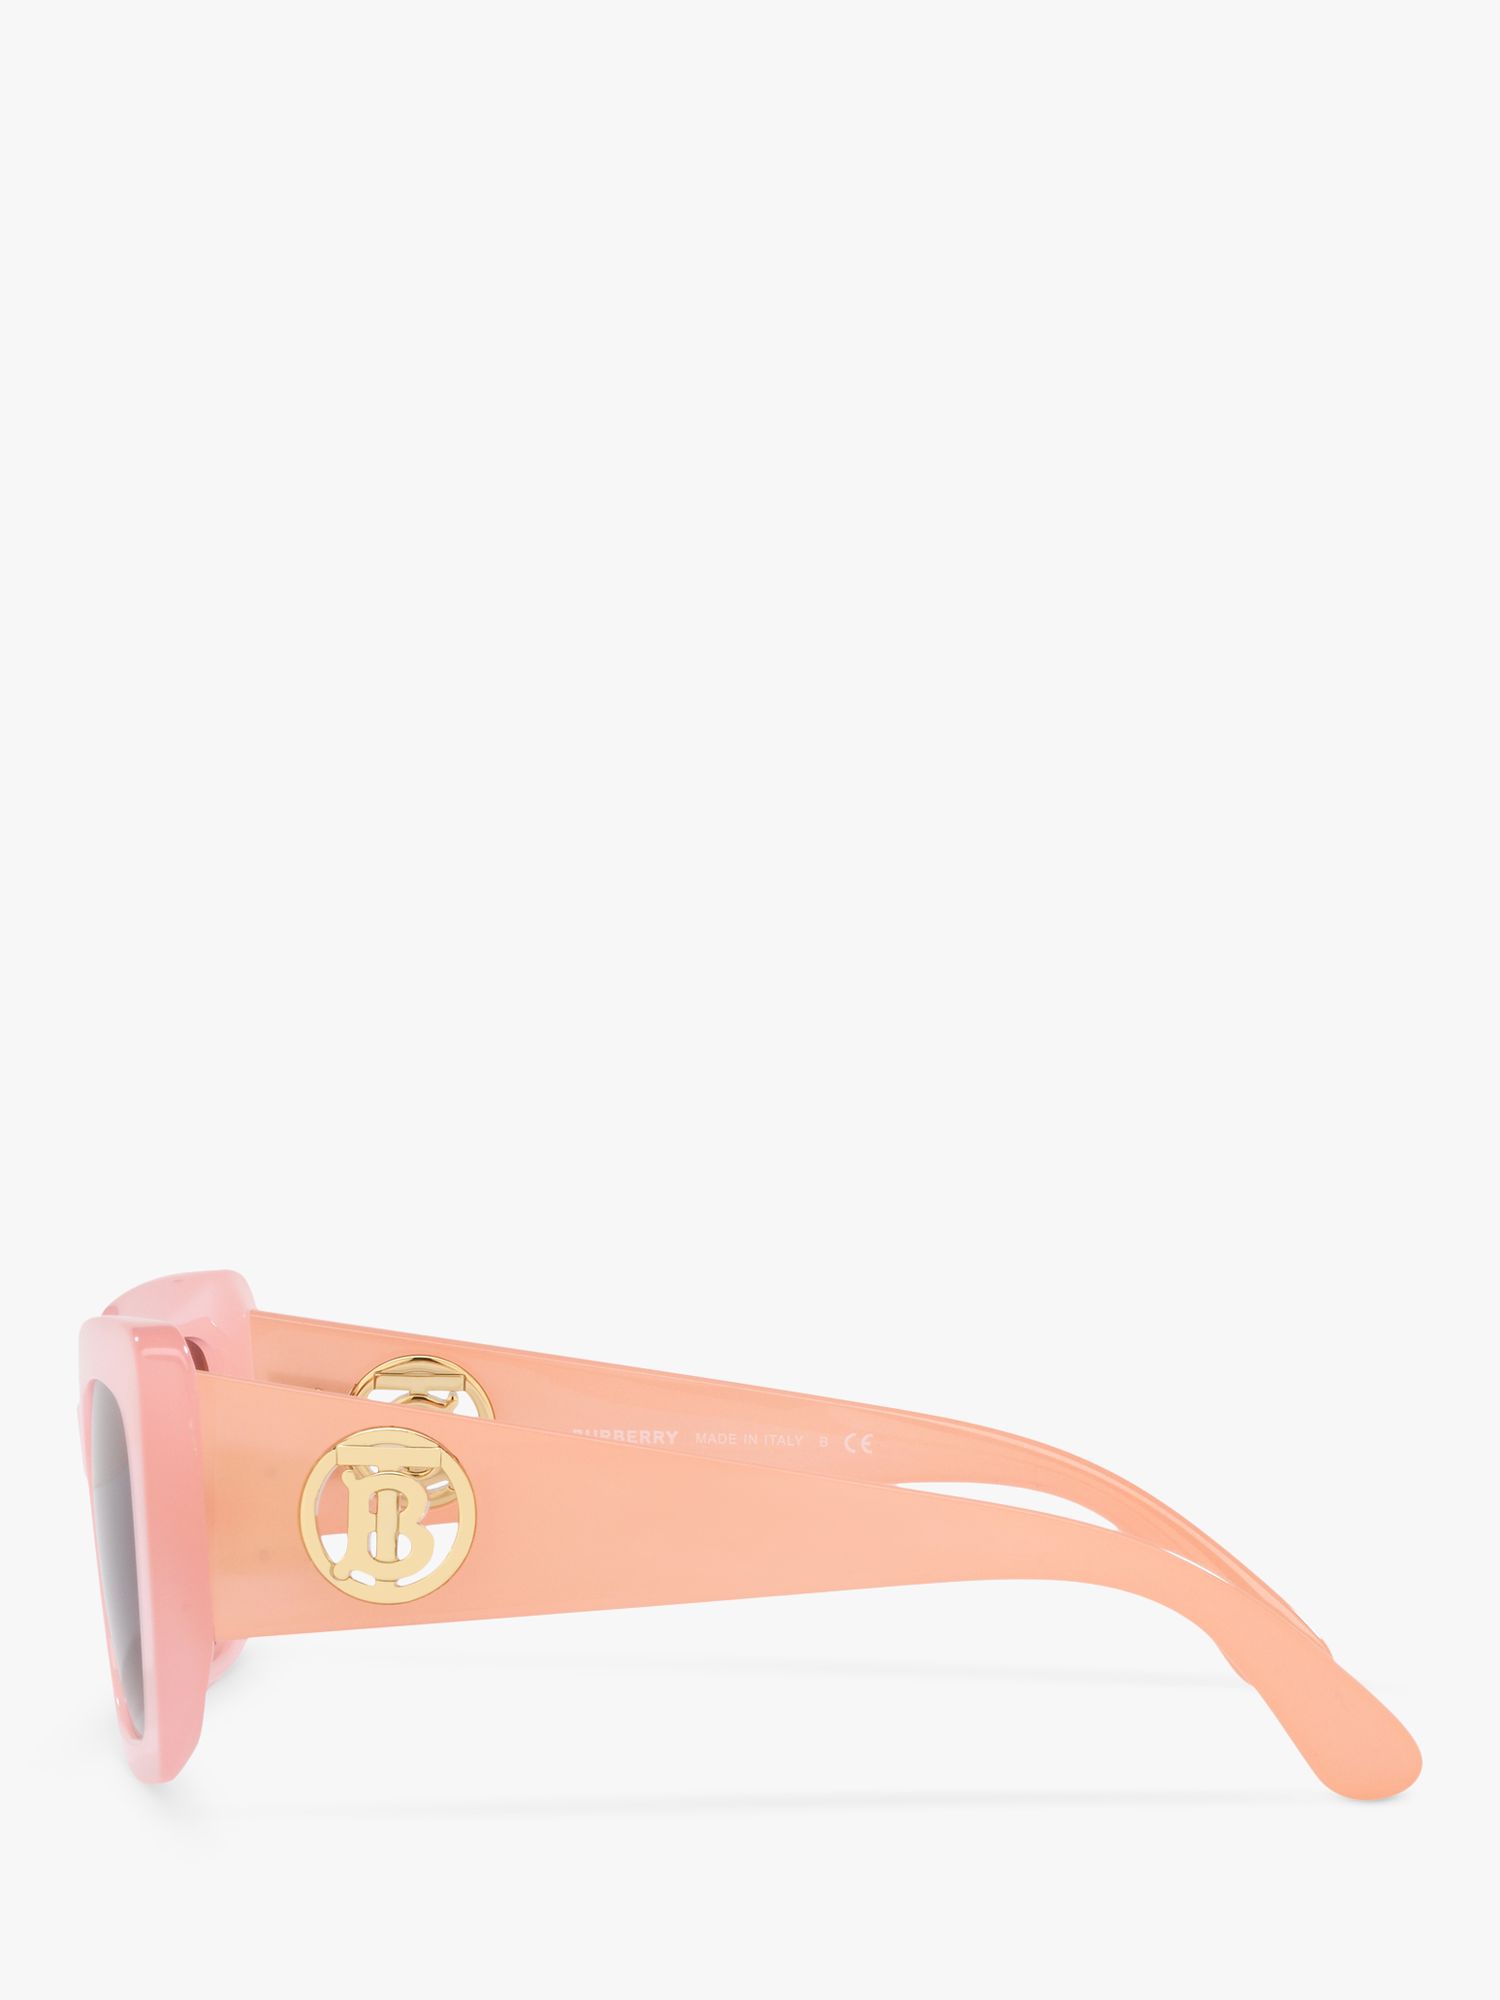 Burberry BE4344 Women's Square Sunglasses, Pink/Brown Gradient